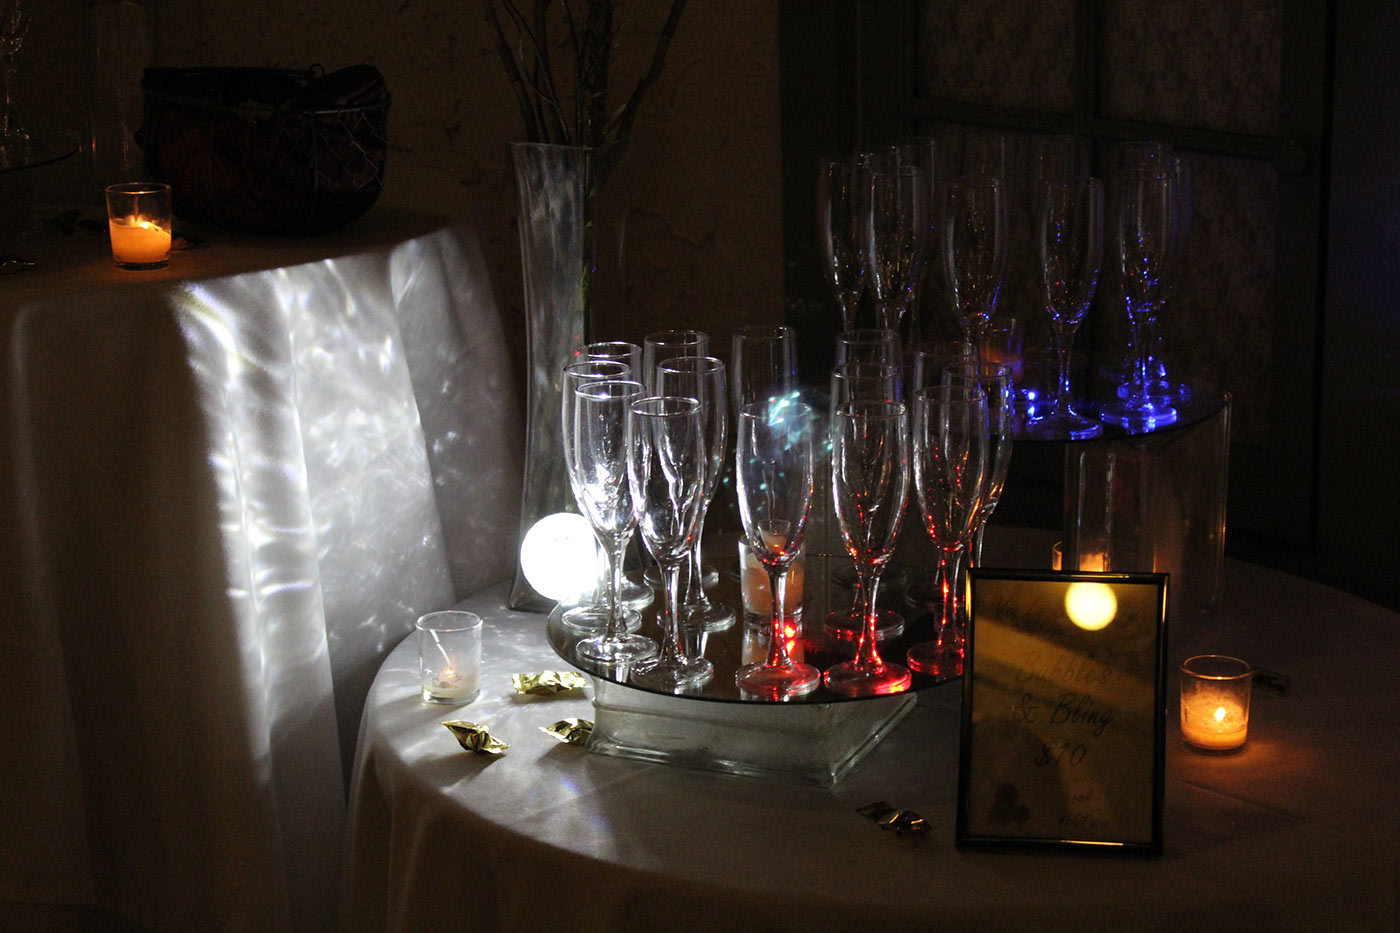 red, white and blue lights shining through tasting glasses